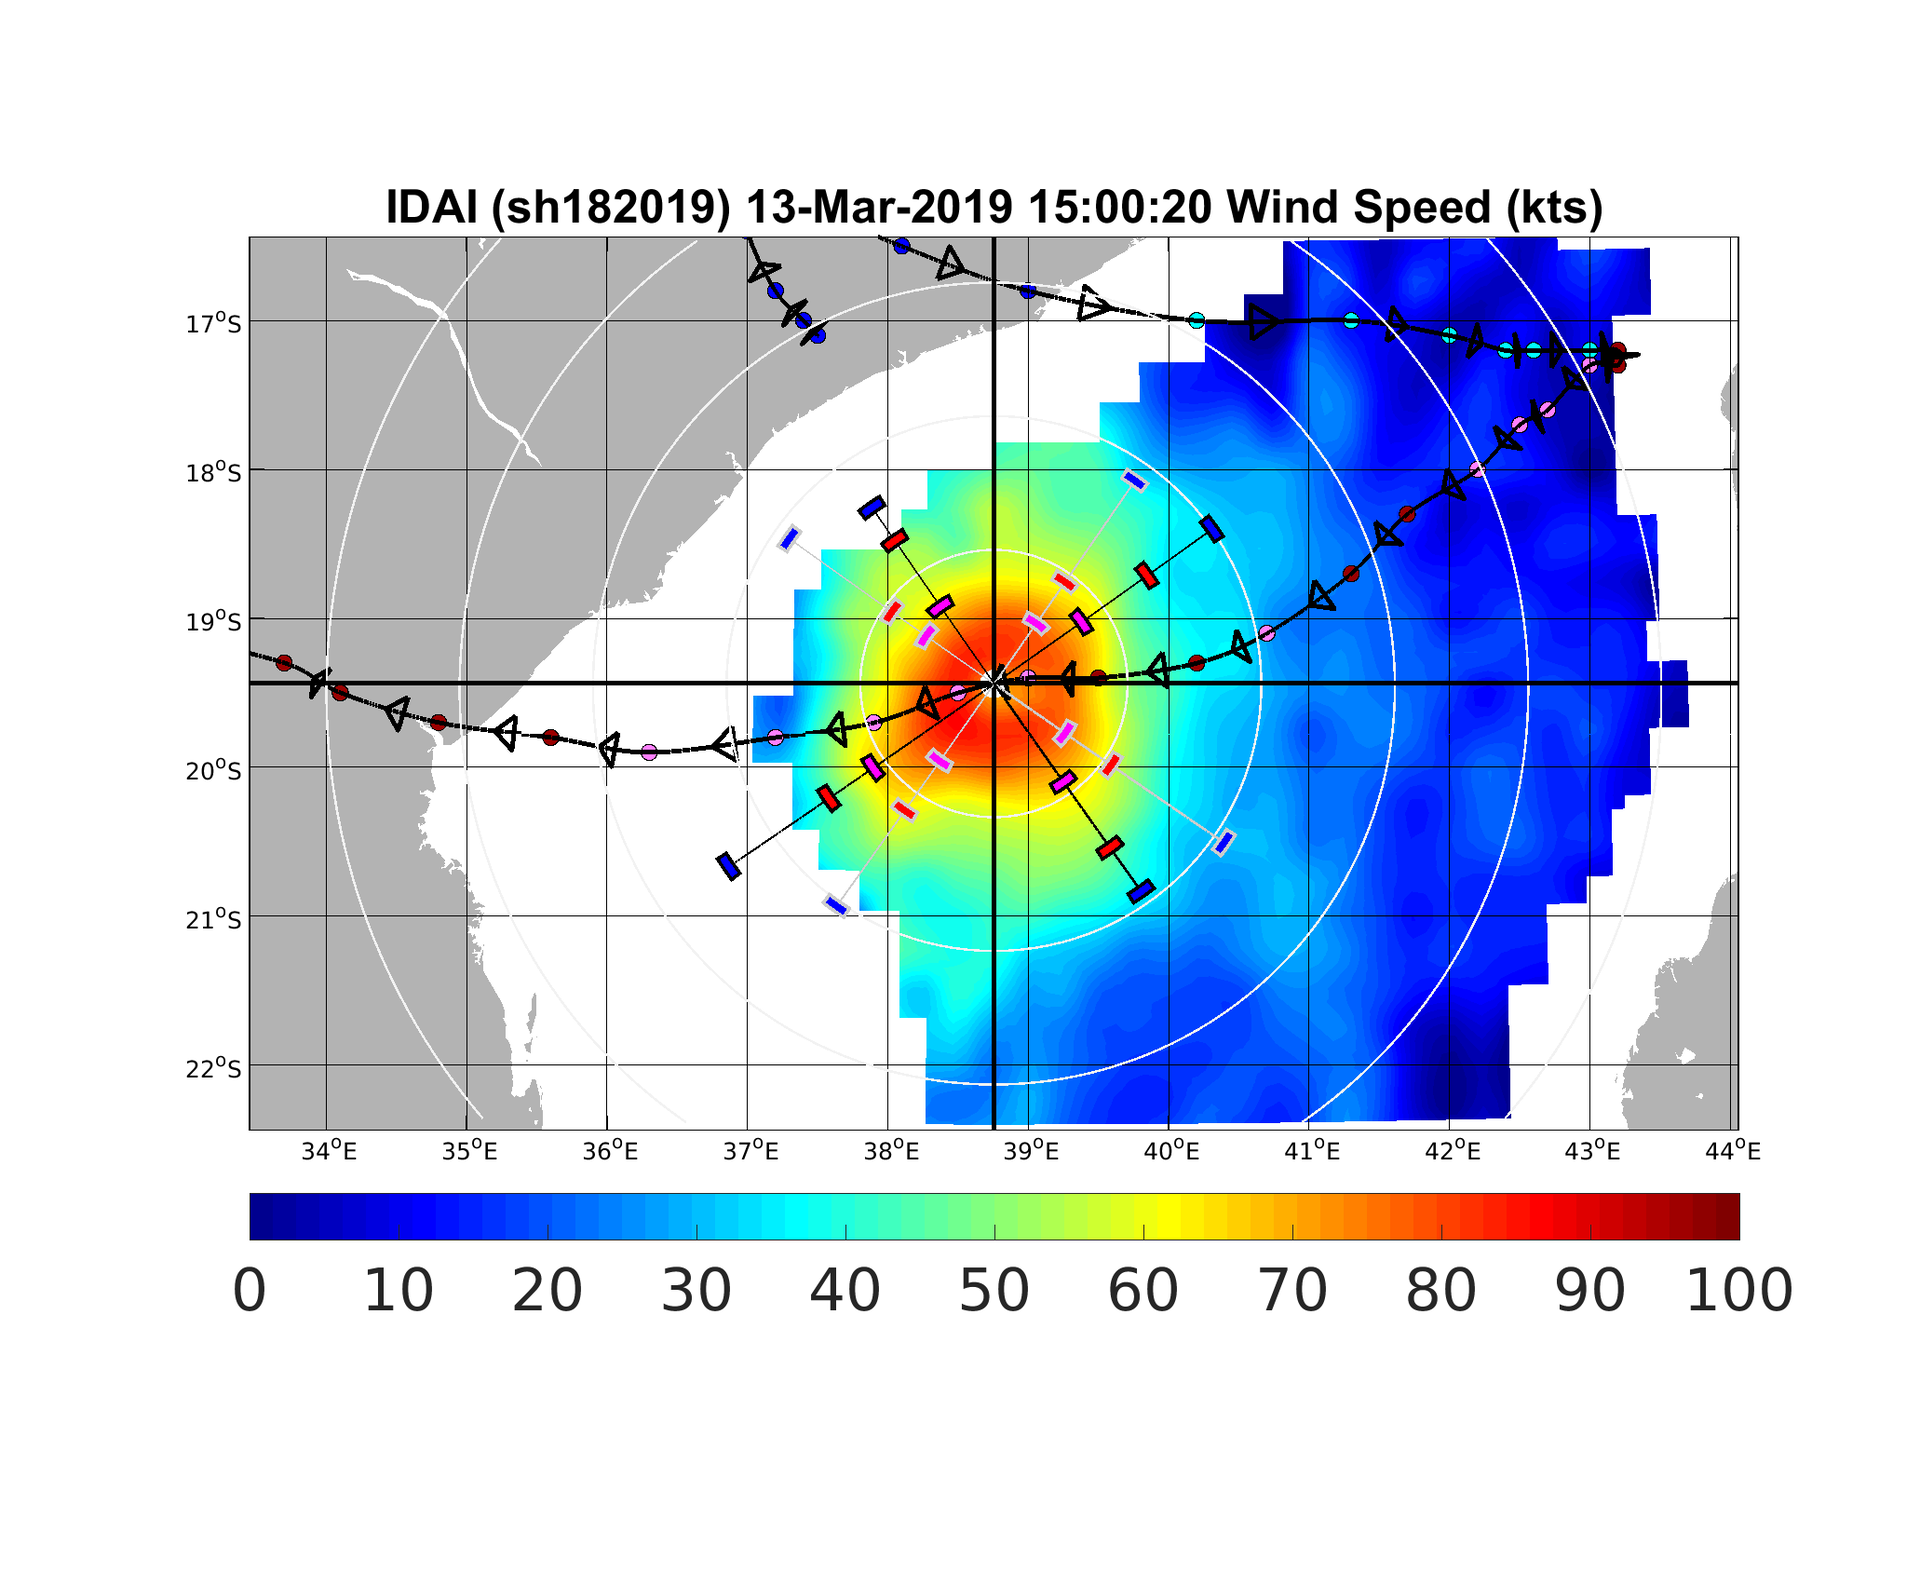 Surface winds under Cyclone Idai from SMOS